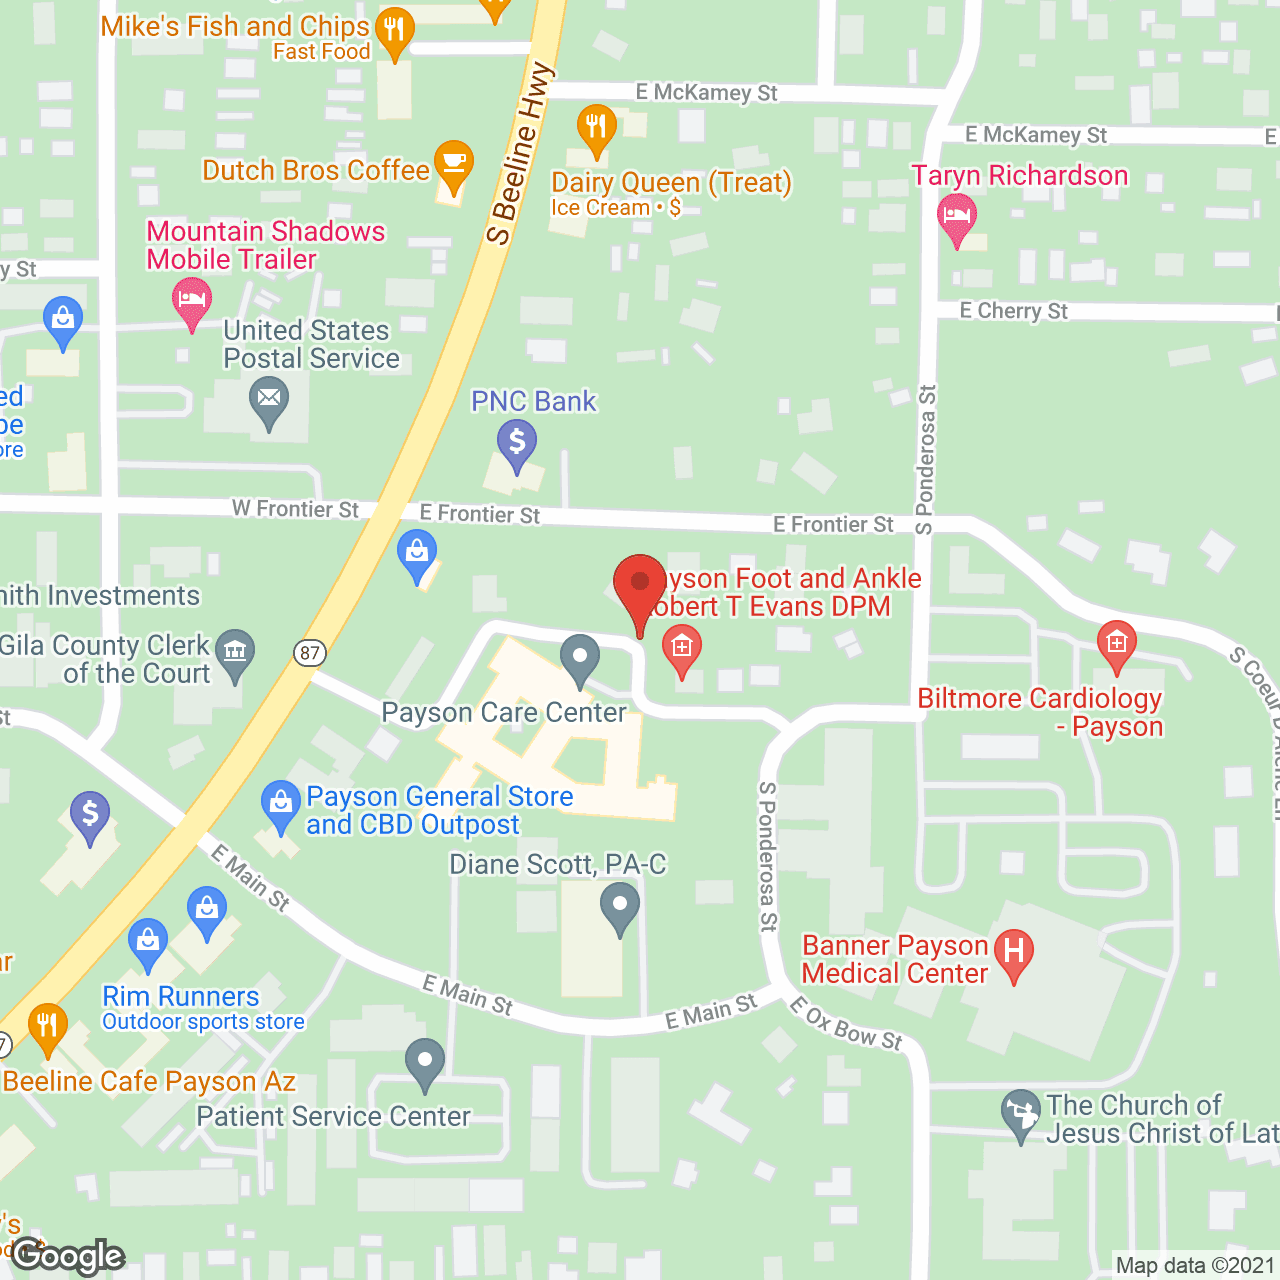 Payson Care Center in google map